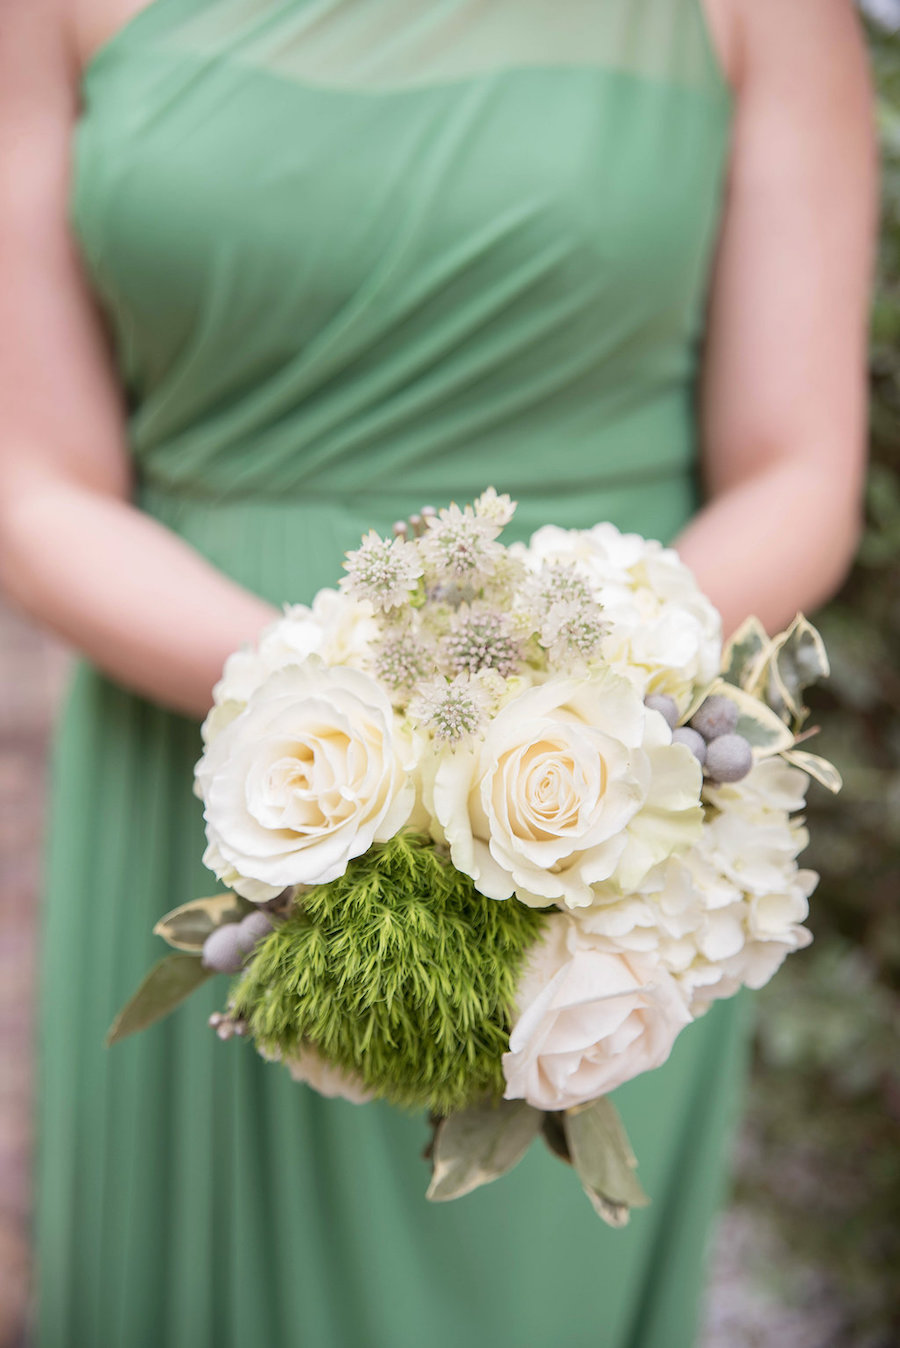 Bridesmaid Wedding Portrait with Green One Shoulder Long Bridesmaid Dress and White Rose Wedding Bouquet with Greenery | St. Petersburg Wedding Photographer Kristen Marie Photography